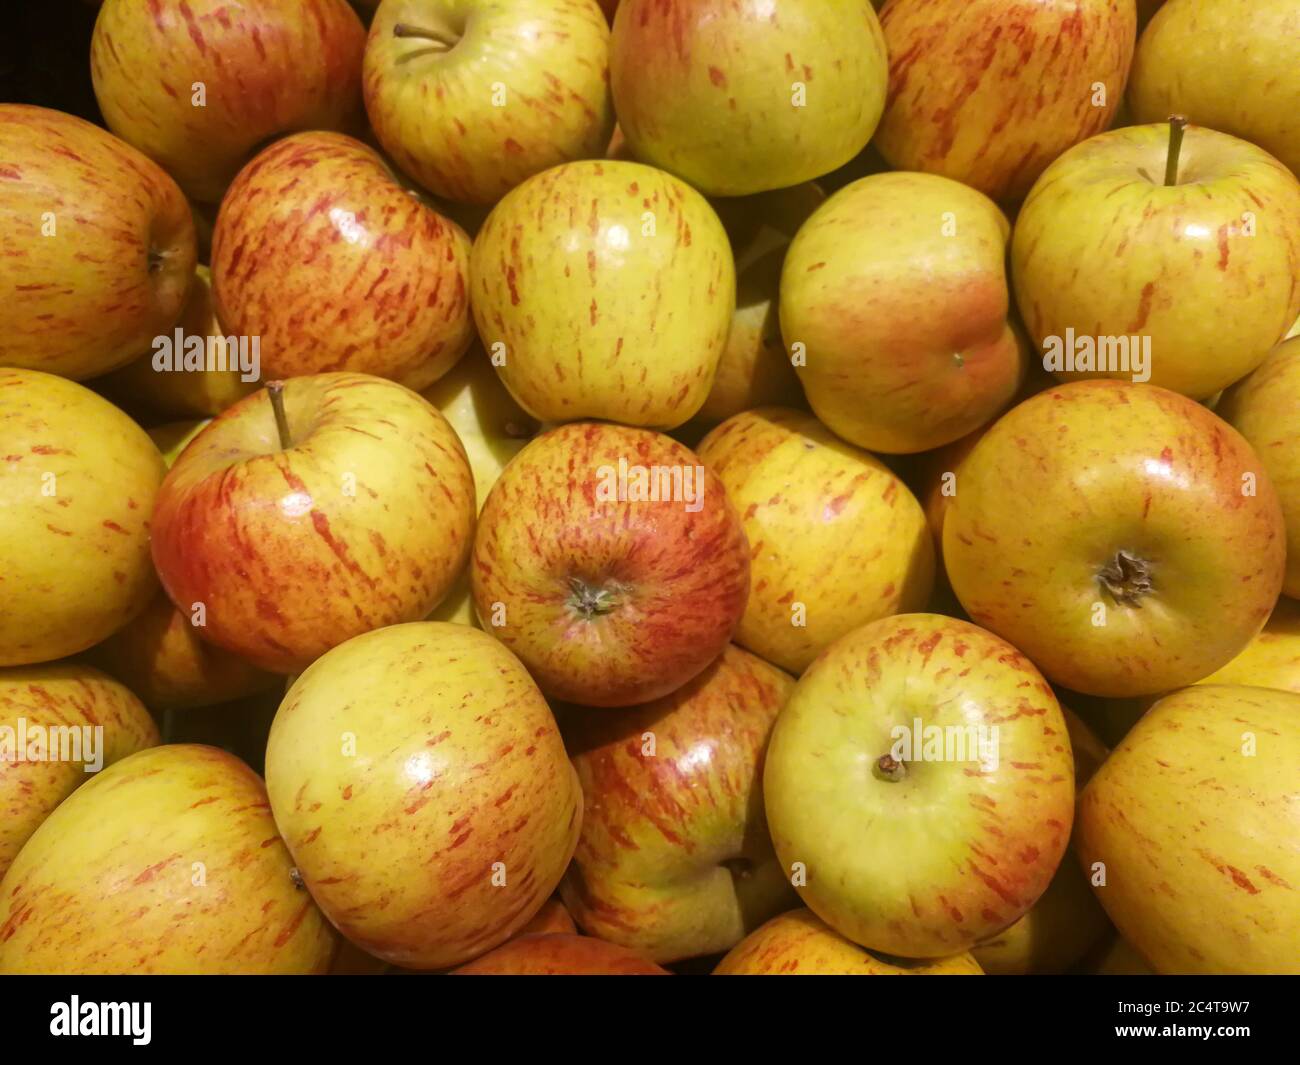 A box of apples of the brand Cox Orange Stock Photo